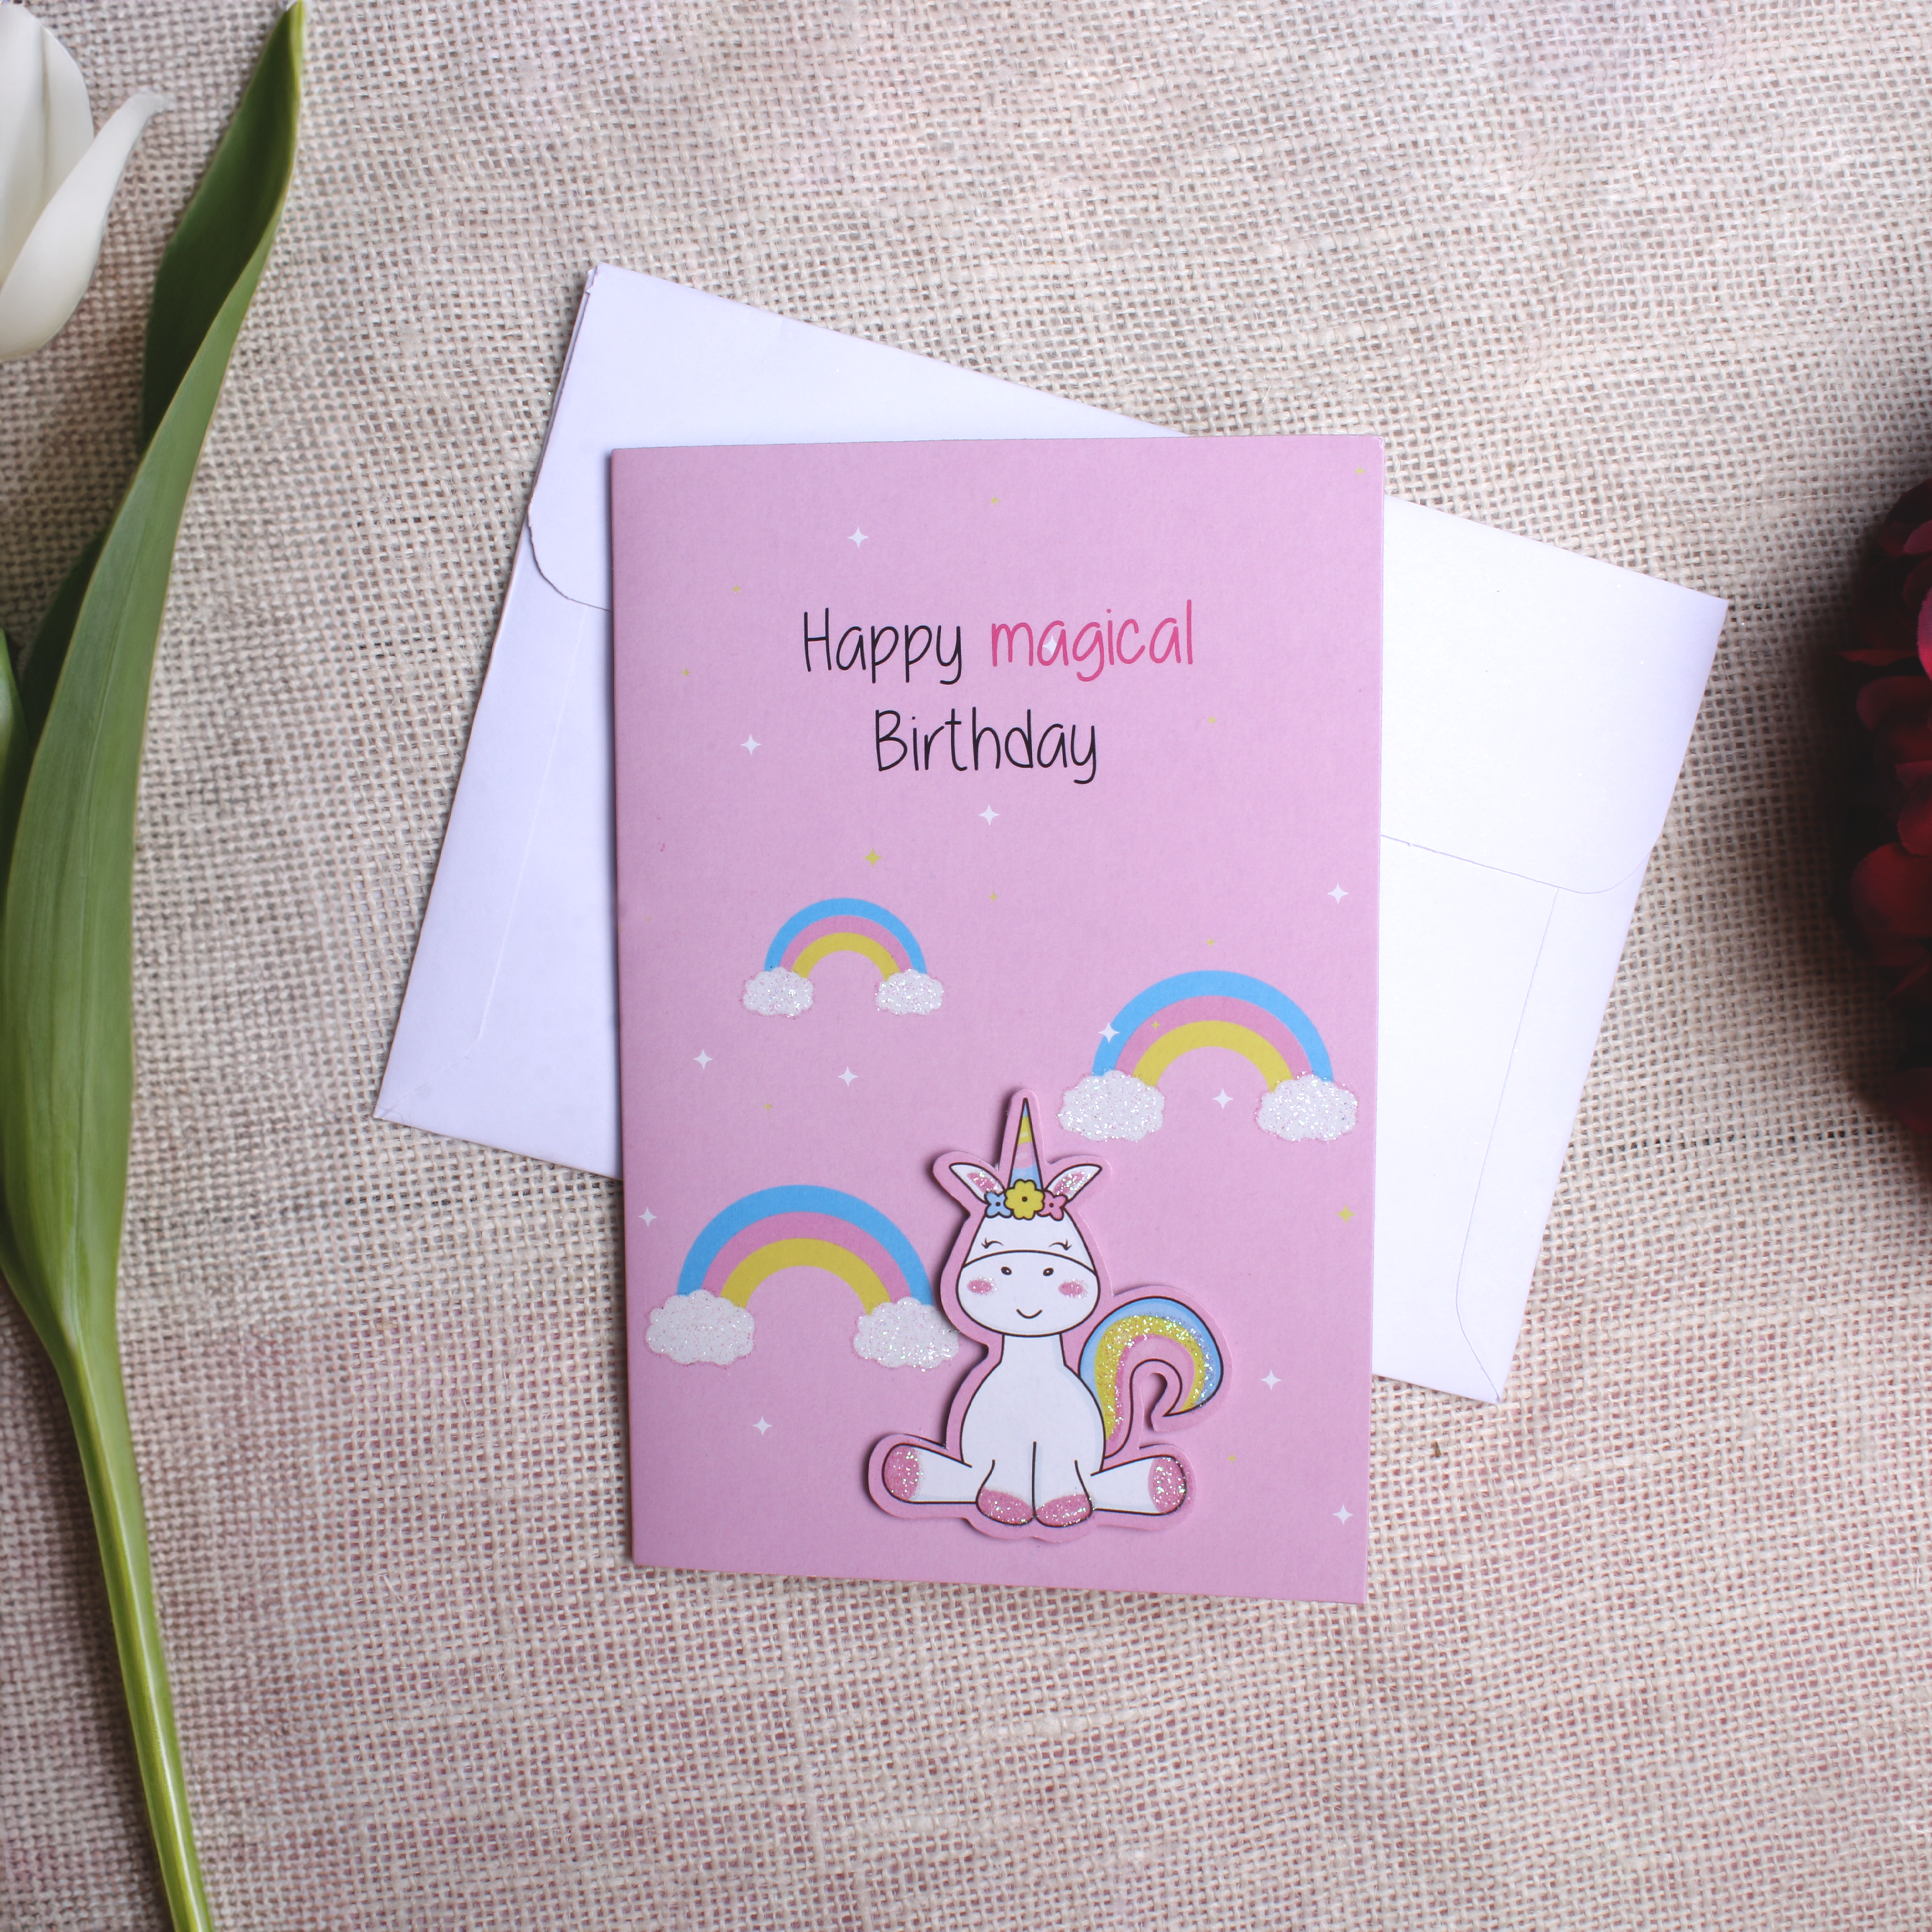 Greeting Card & Envelope Magical Birthday 4 X 6inch 2pc